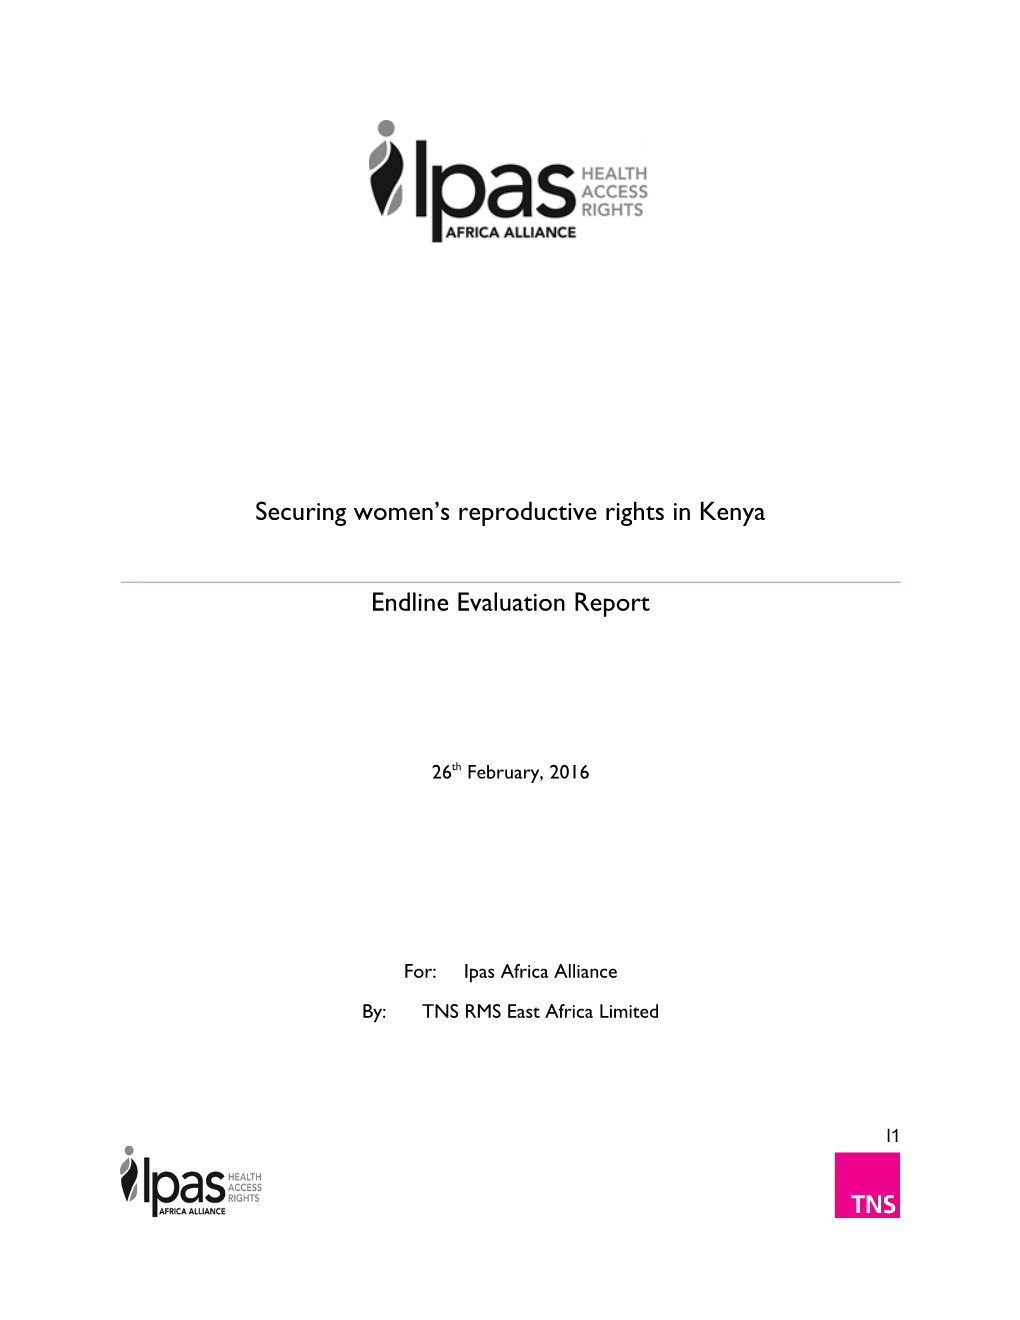 Securing Women's Reproductive Rights in Kenya Endline Evaluation Report